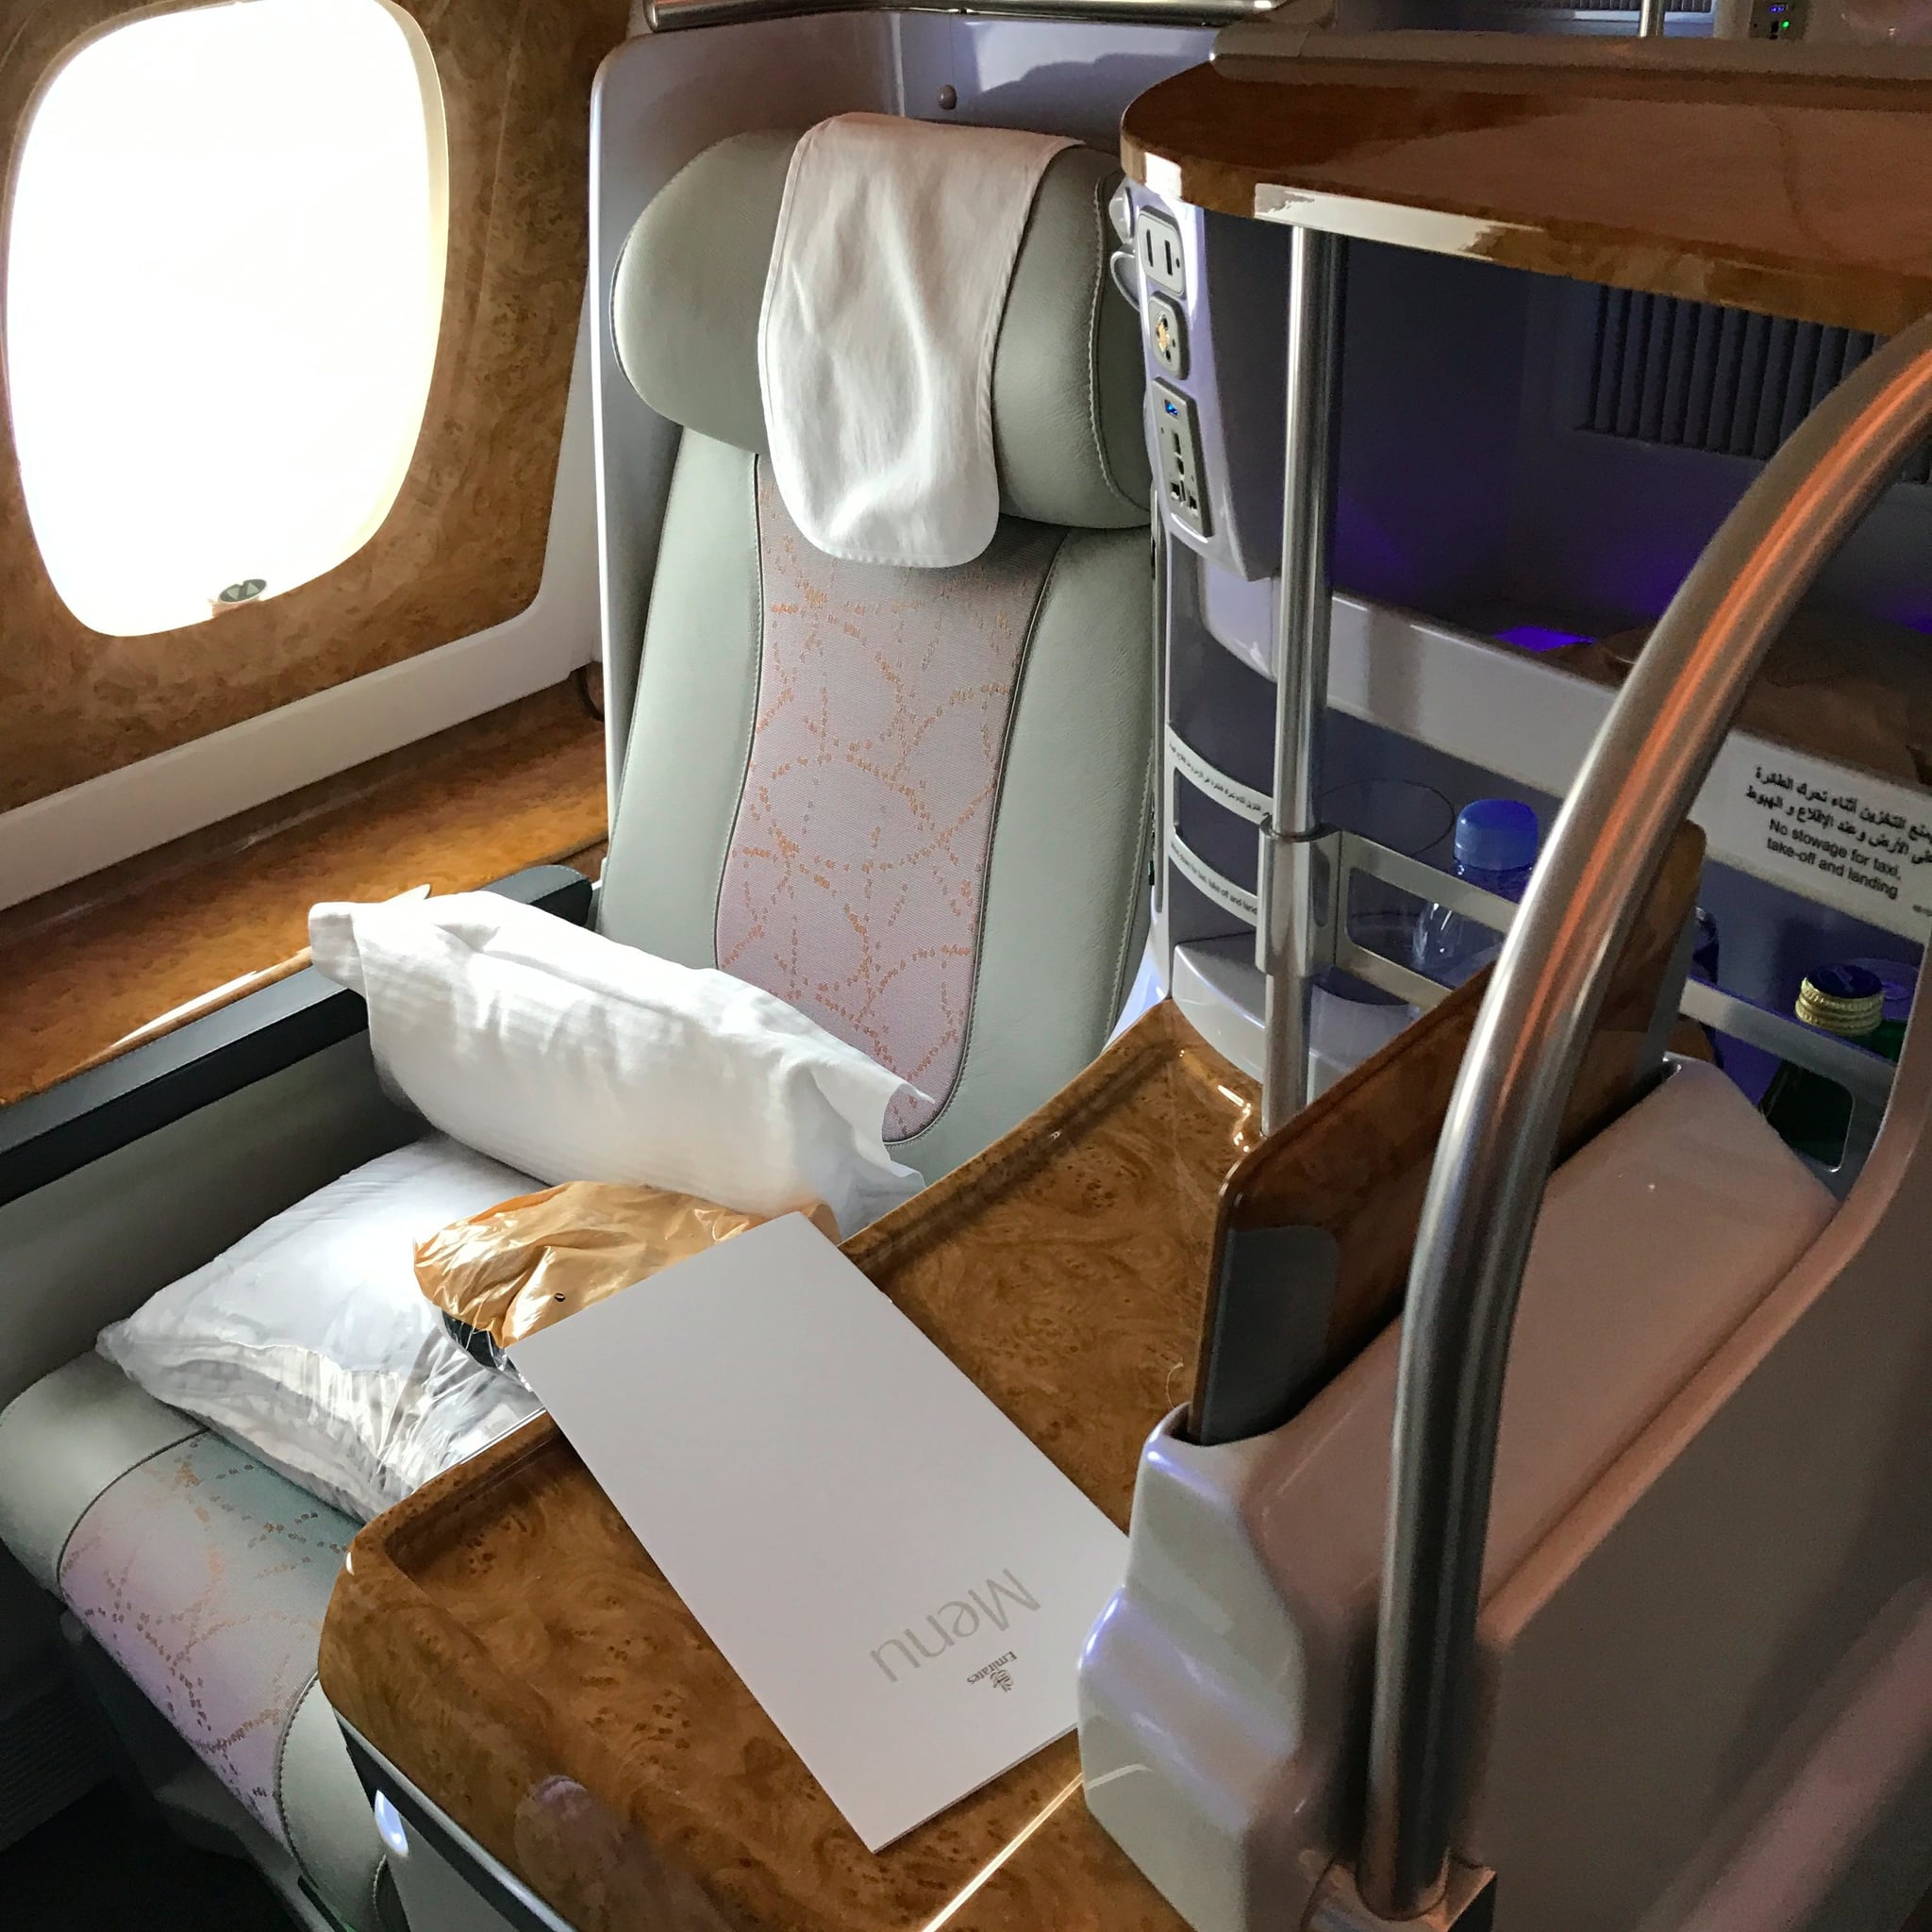 emirates airlines business class